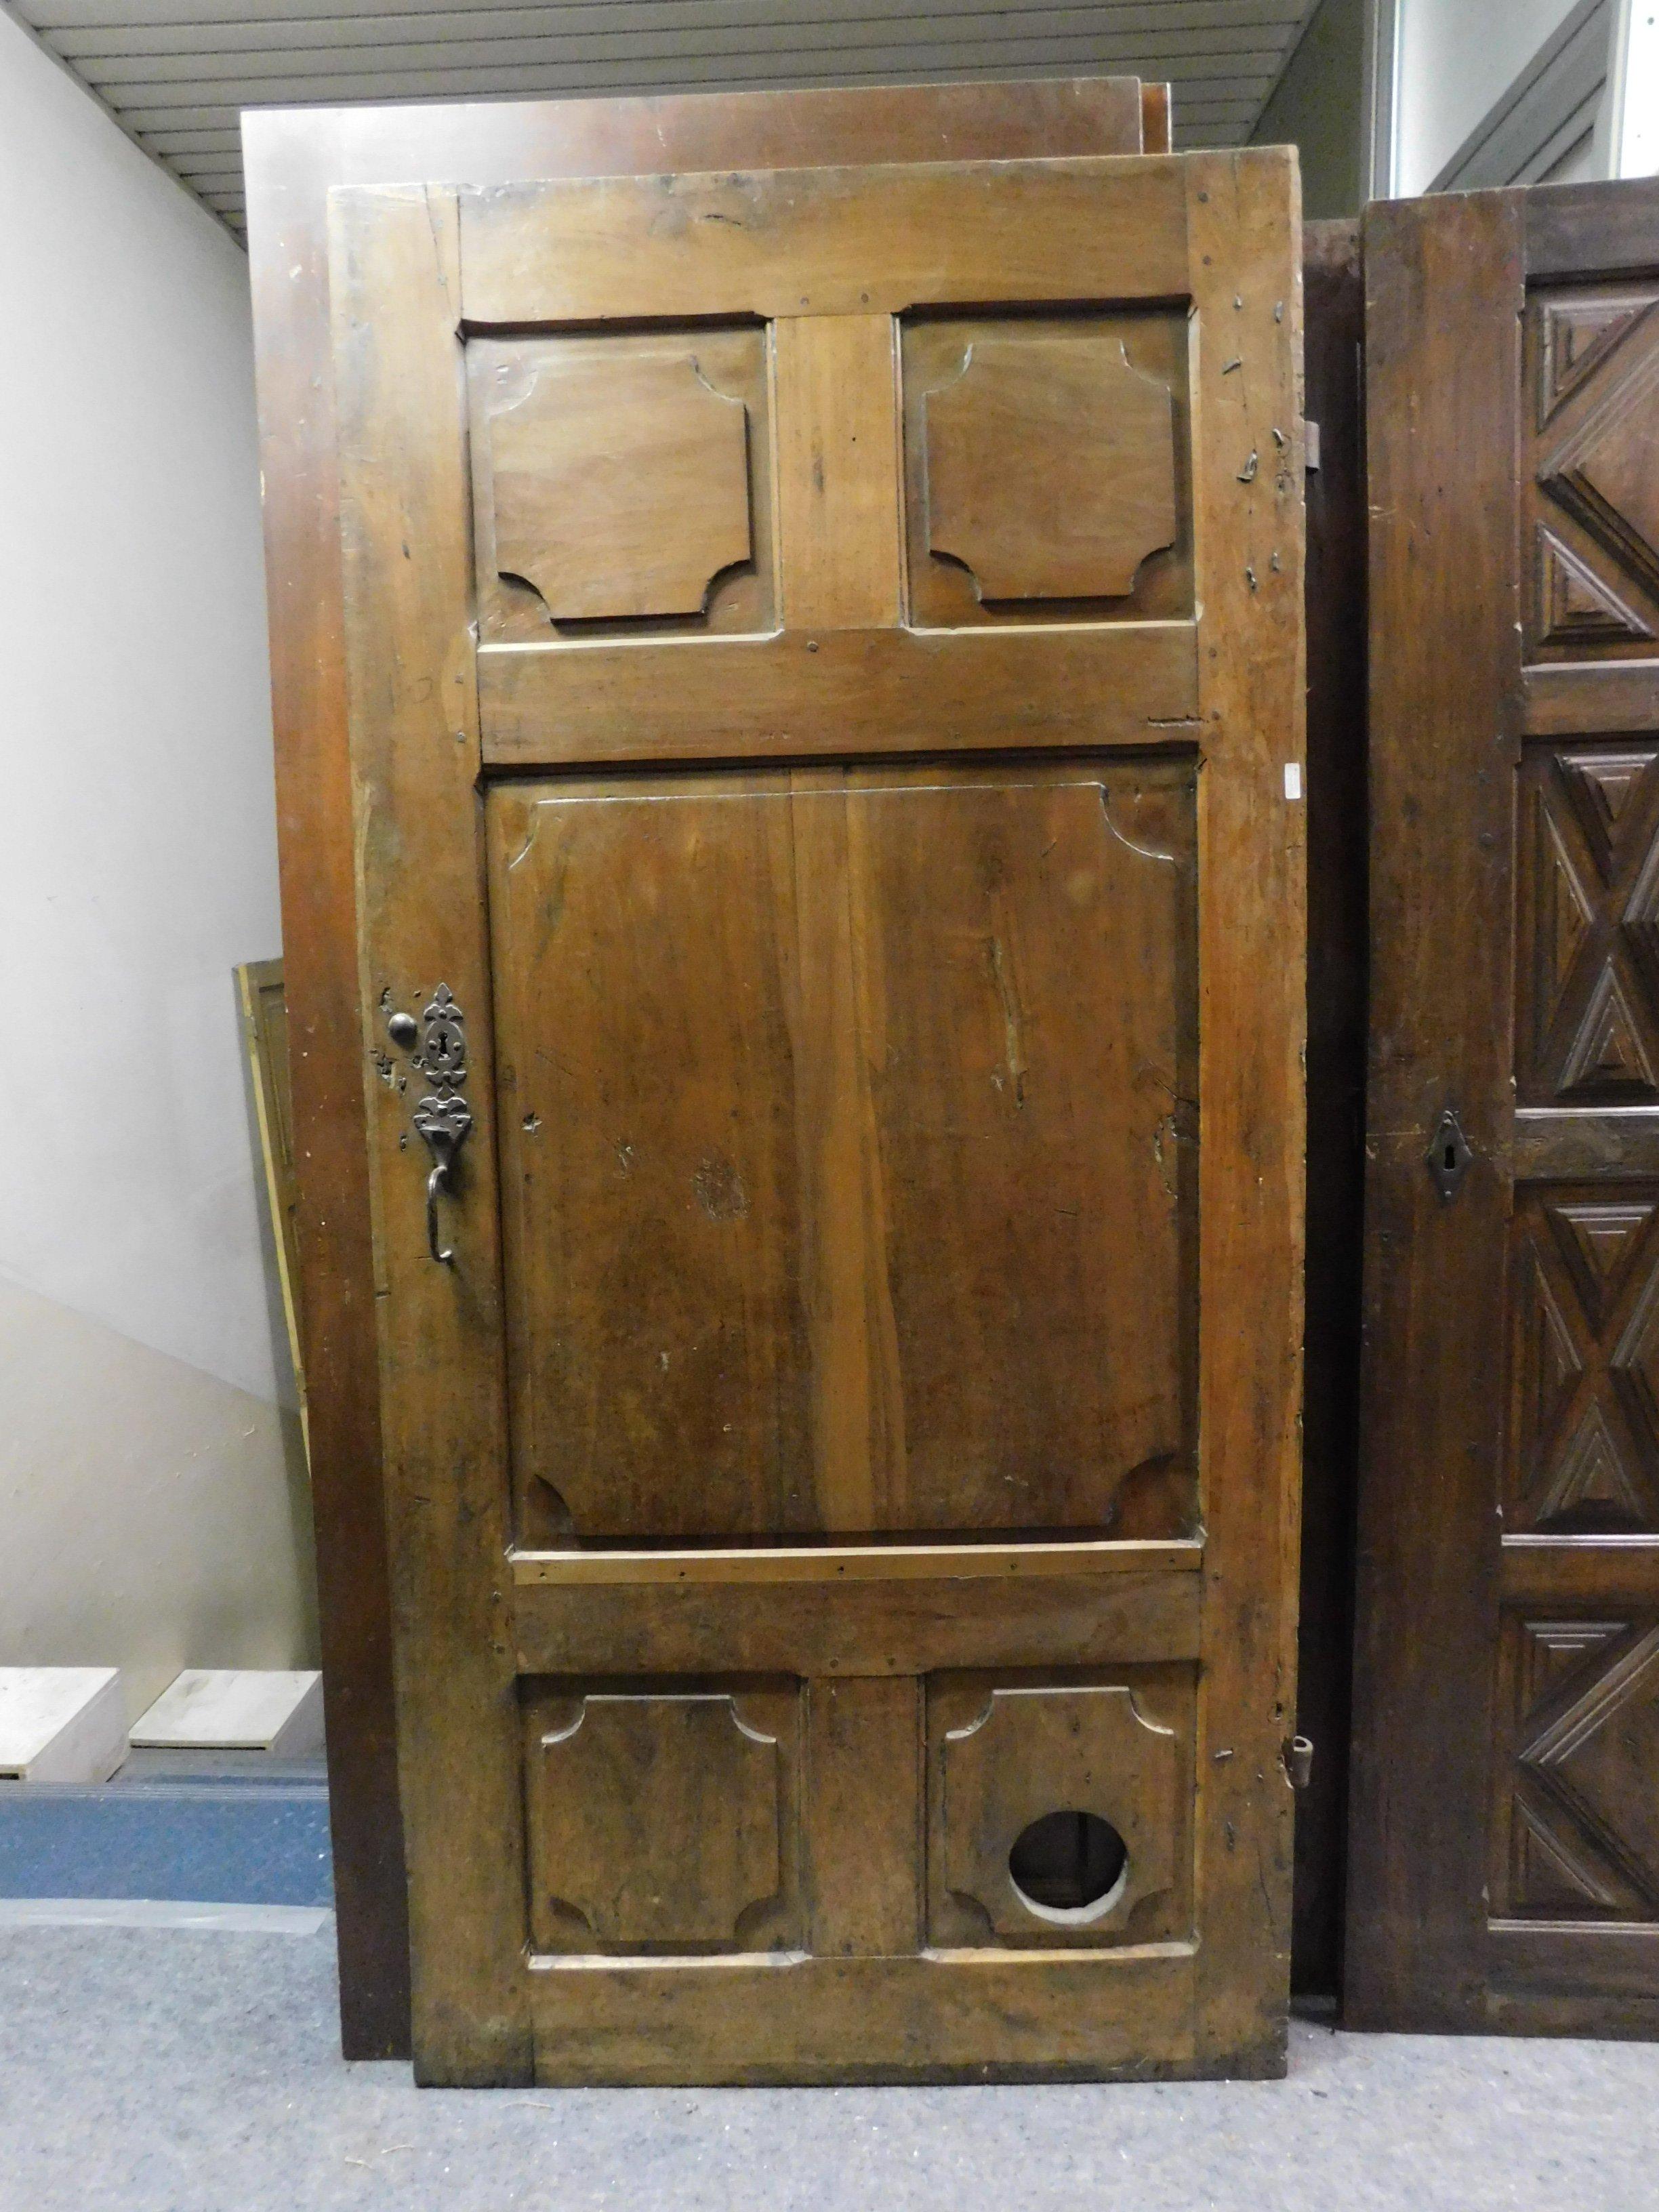 Ancient dark brown door typical of very hard wood, hand carved panels, and very good conservation conditions, still with original irons, made in the 1700s in Italy.
At the bottom of the door, you can see the hole for the cat to pass through, a pet